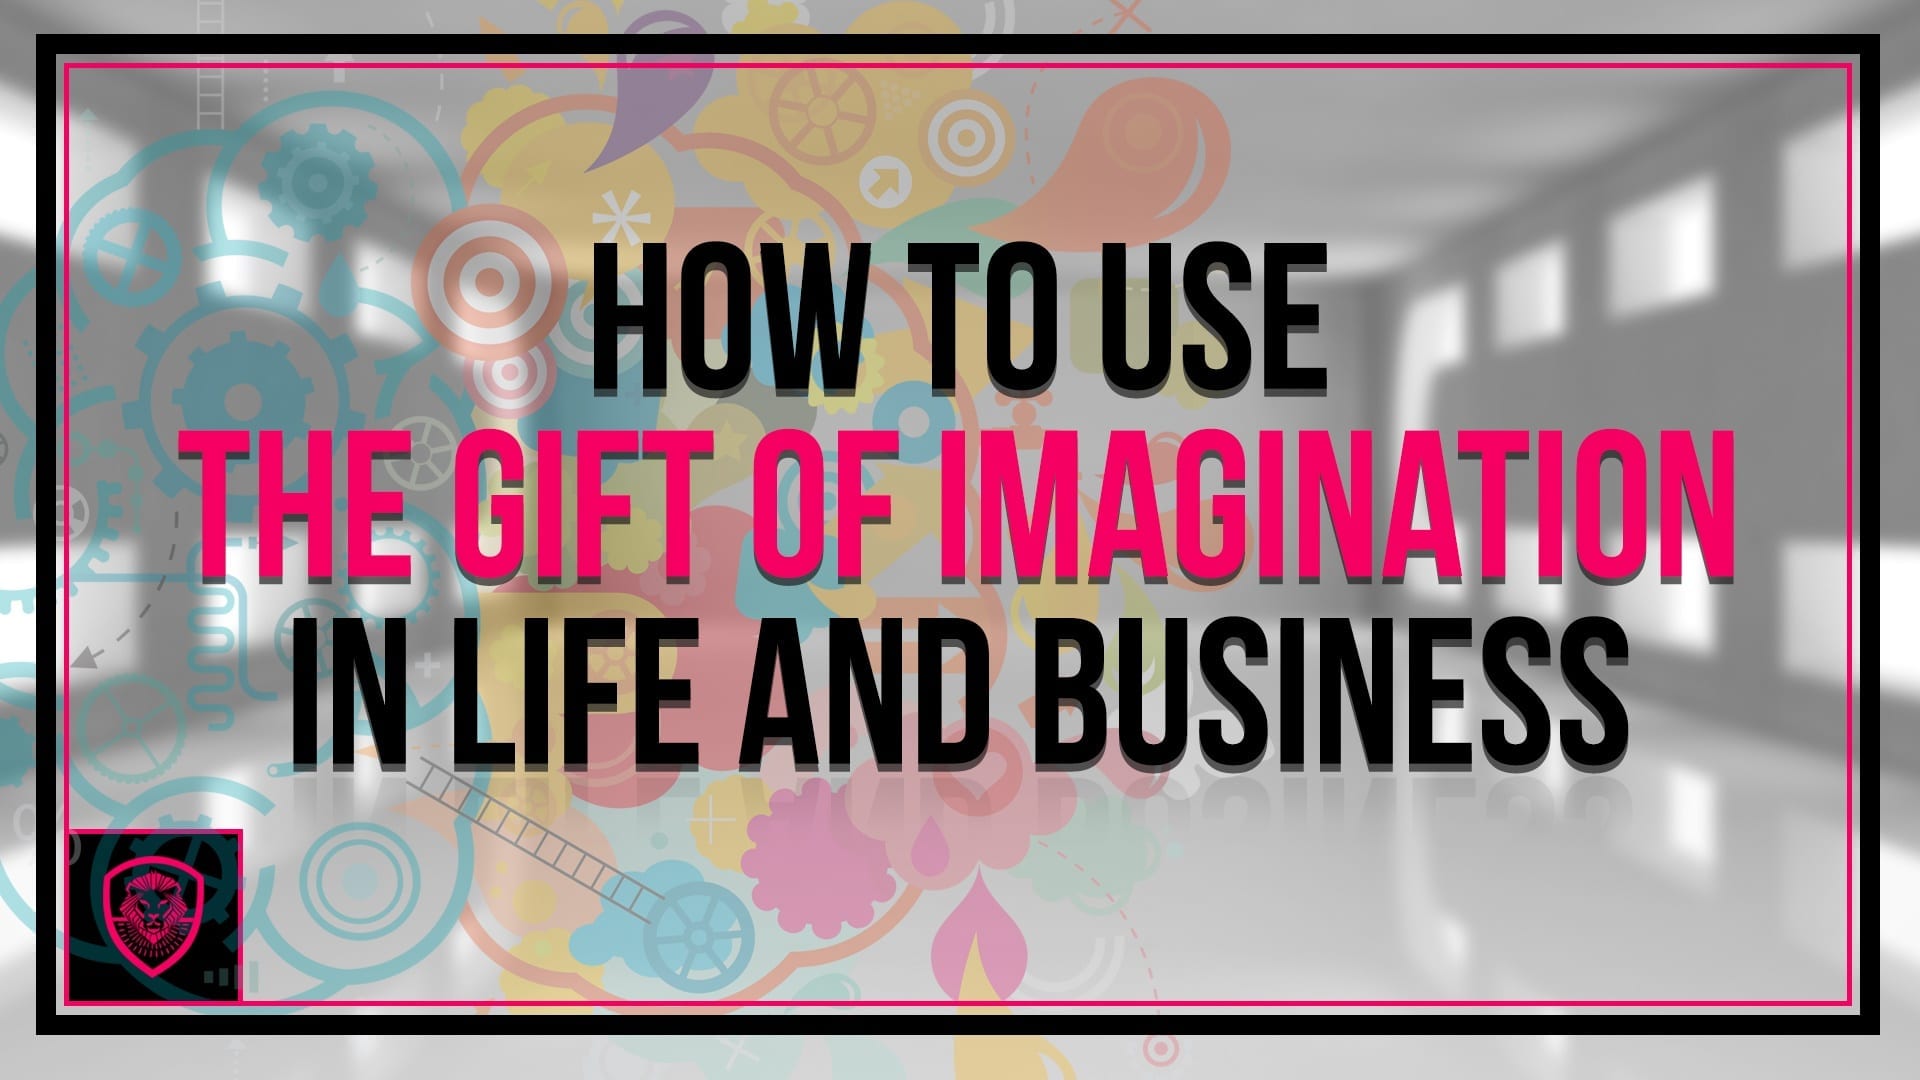 Do you have a vivid imagination? If so, is that a good or bad thing? It all depends on how you use the gift of imagination.